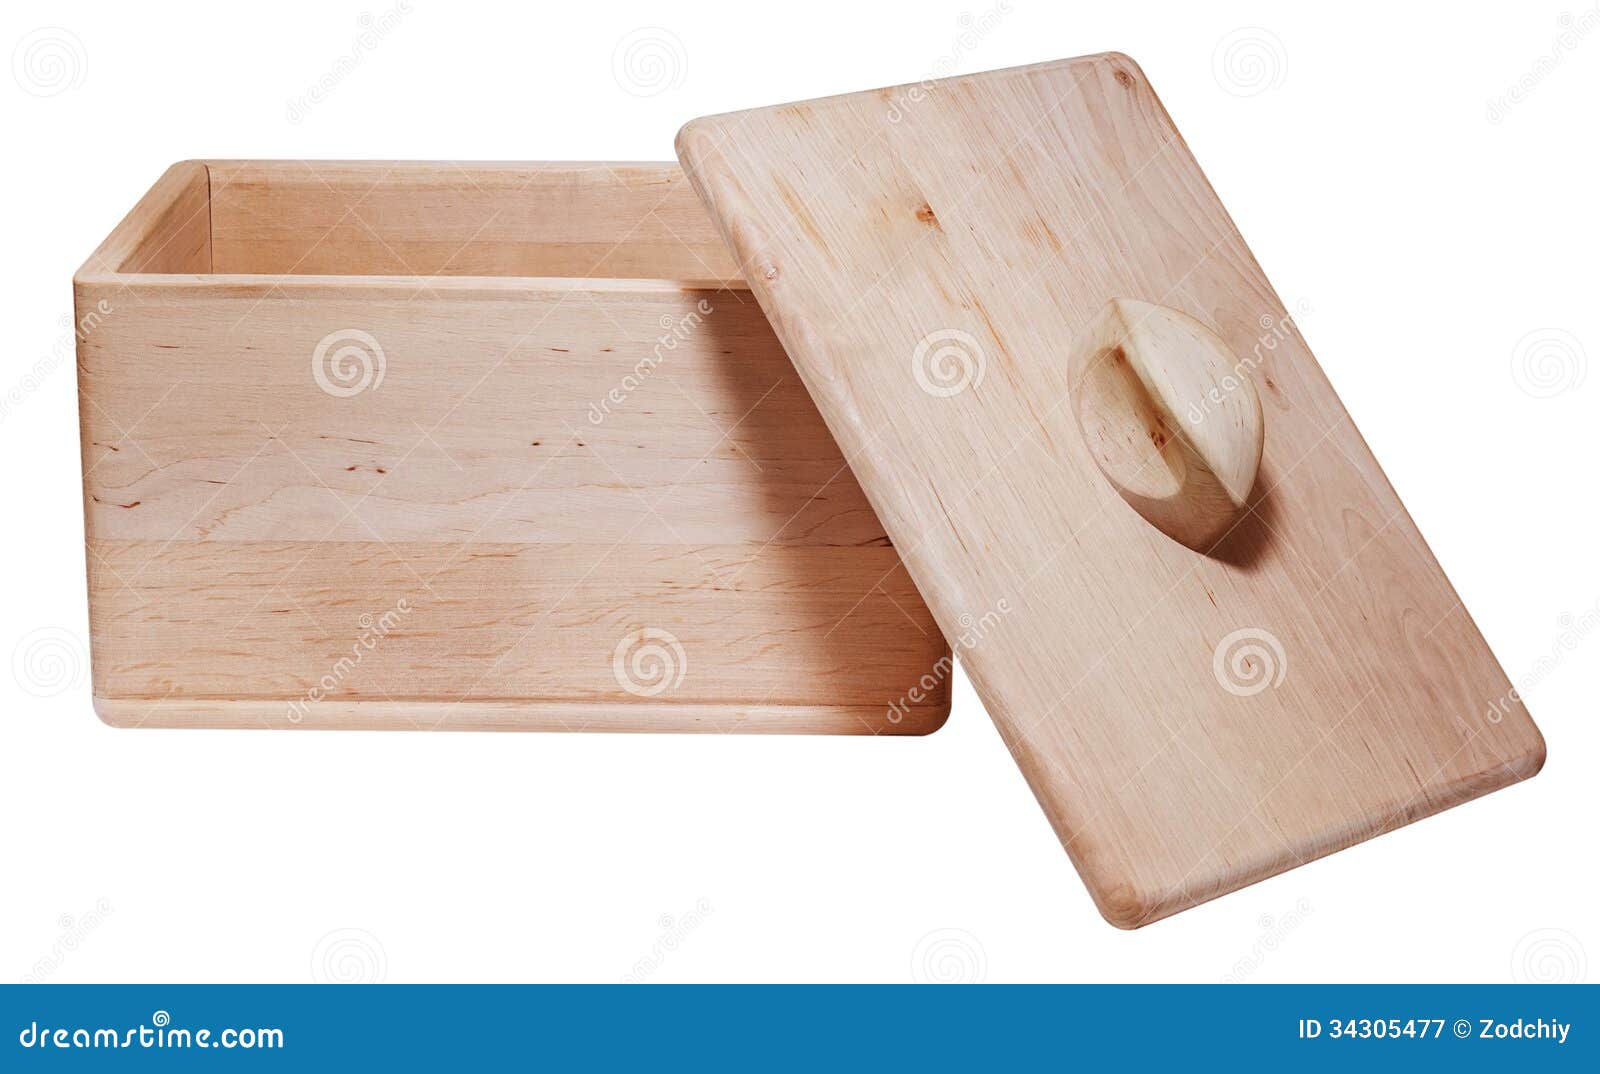 Wooden Box For Cookies Royalty Free Stock Photography - Image 